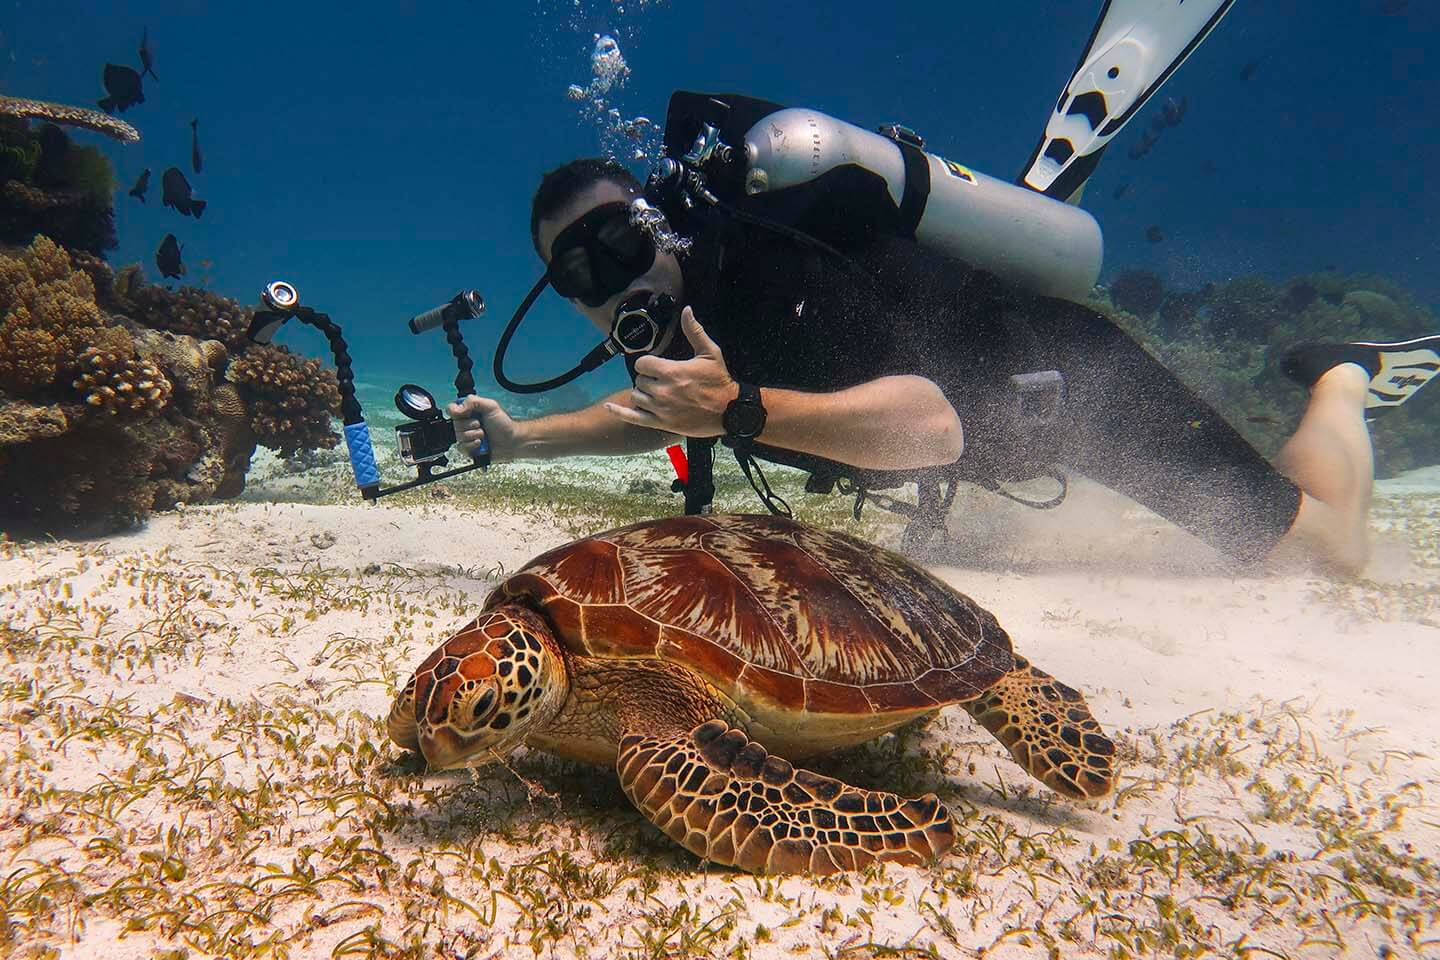 Diver and Turtle in Balicasag Island.  Photo shot with a Canon G7X Mark II and Fantasea Underwater Casing